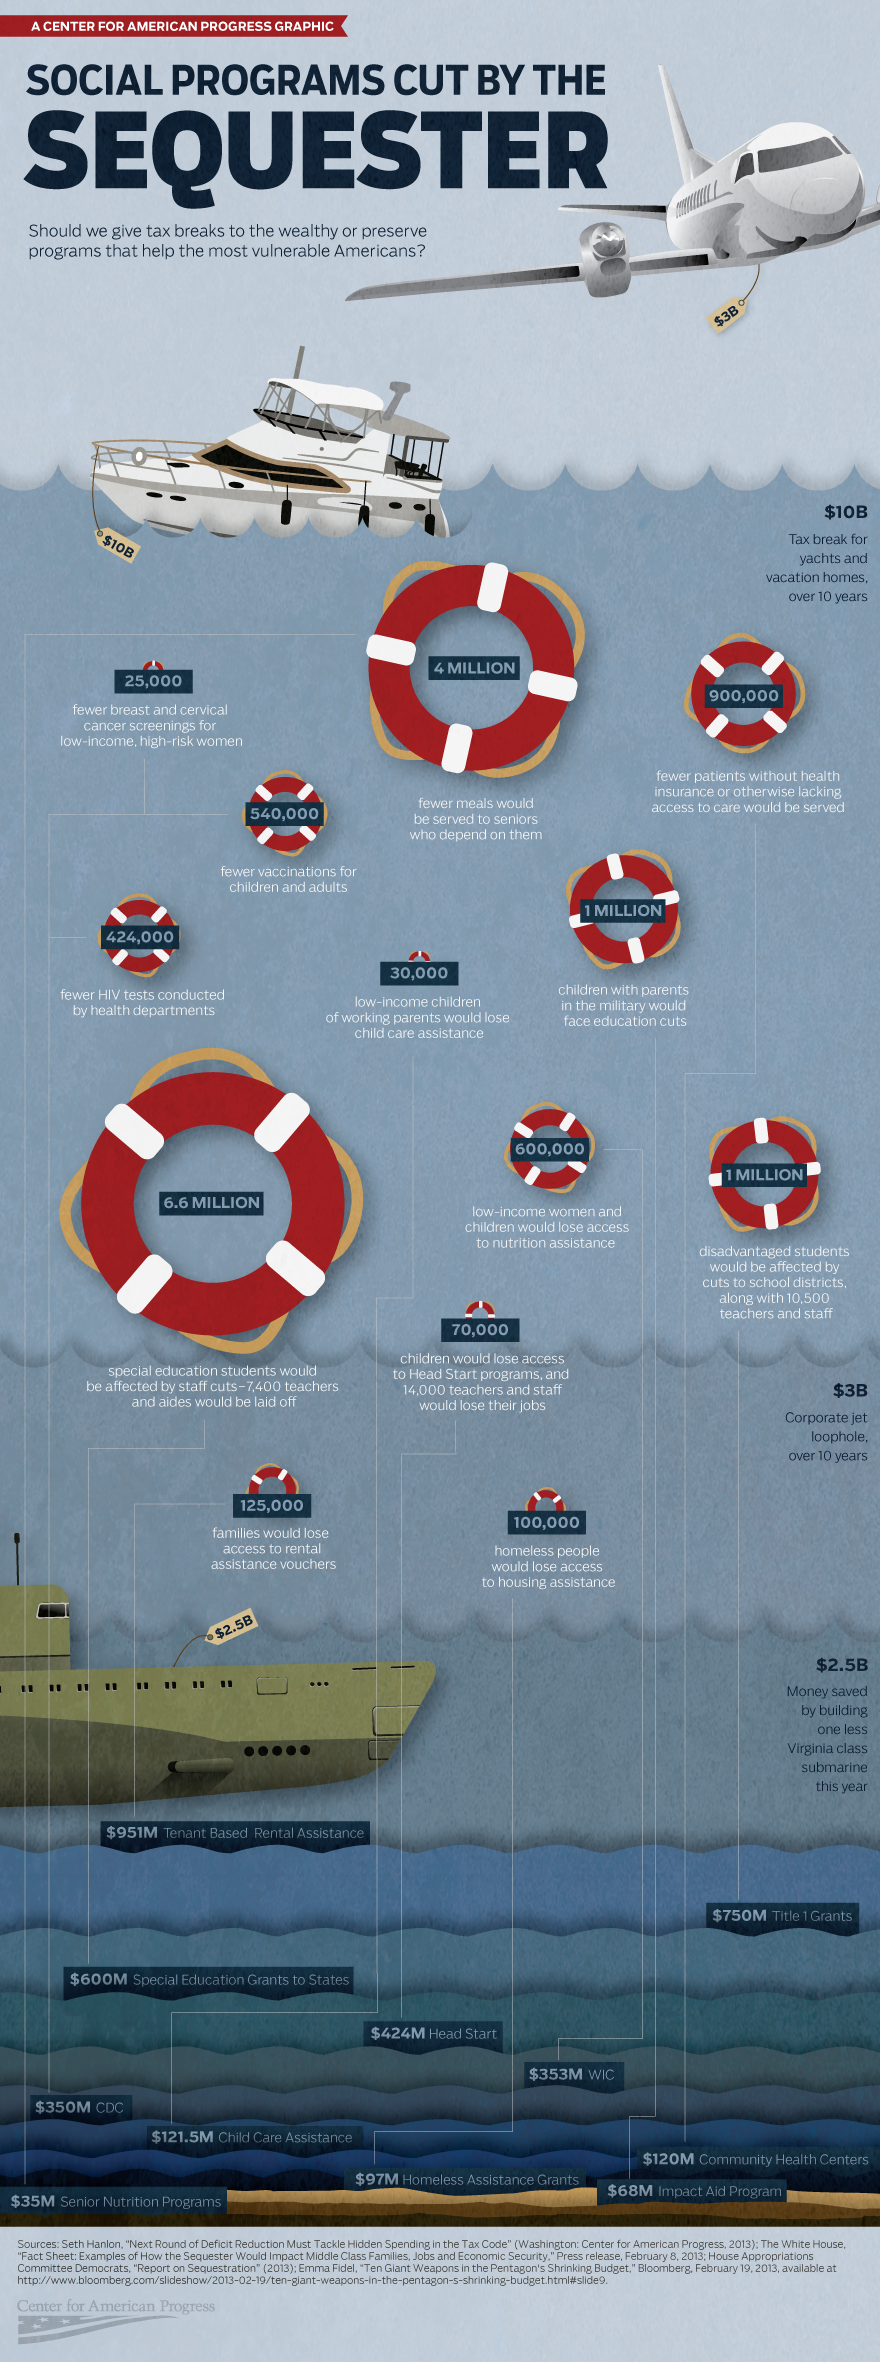 Sequester infographic